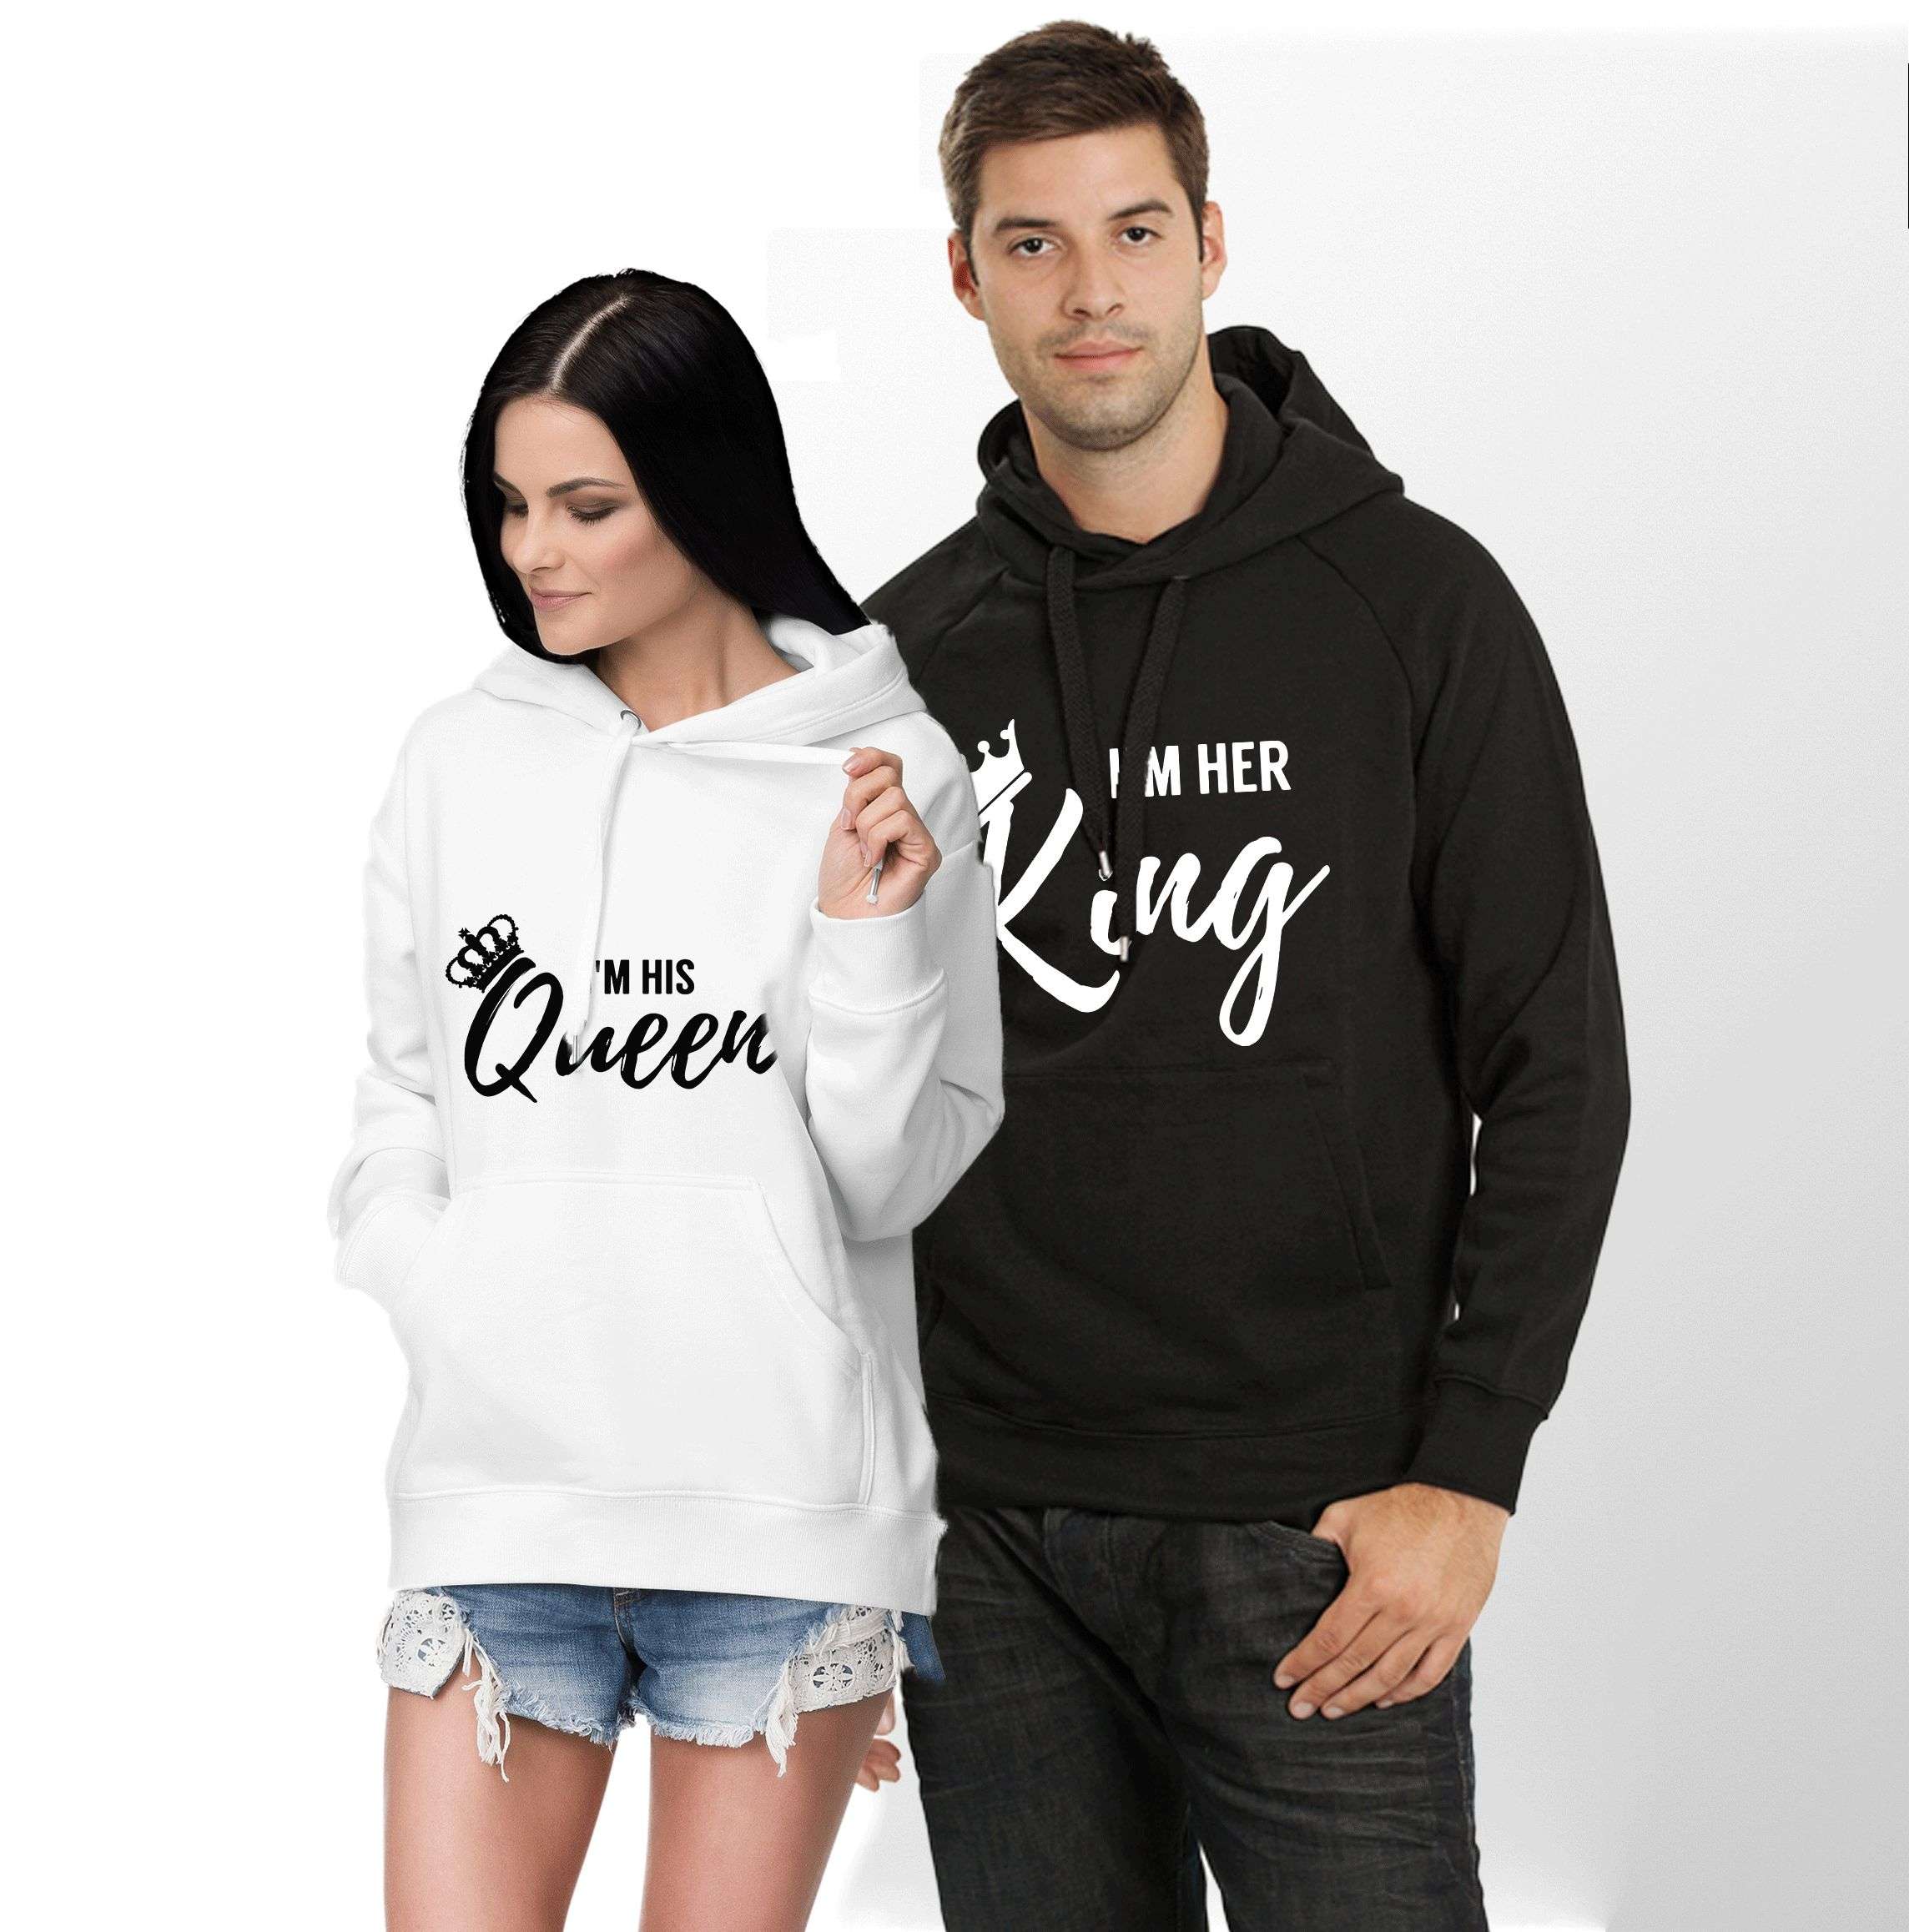 King & Queen hoodies for mom and dad  hooded sweatshirt